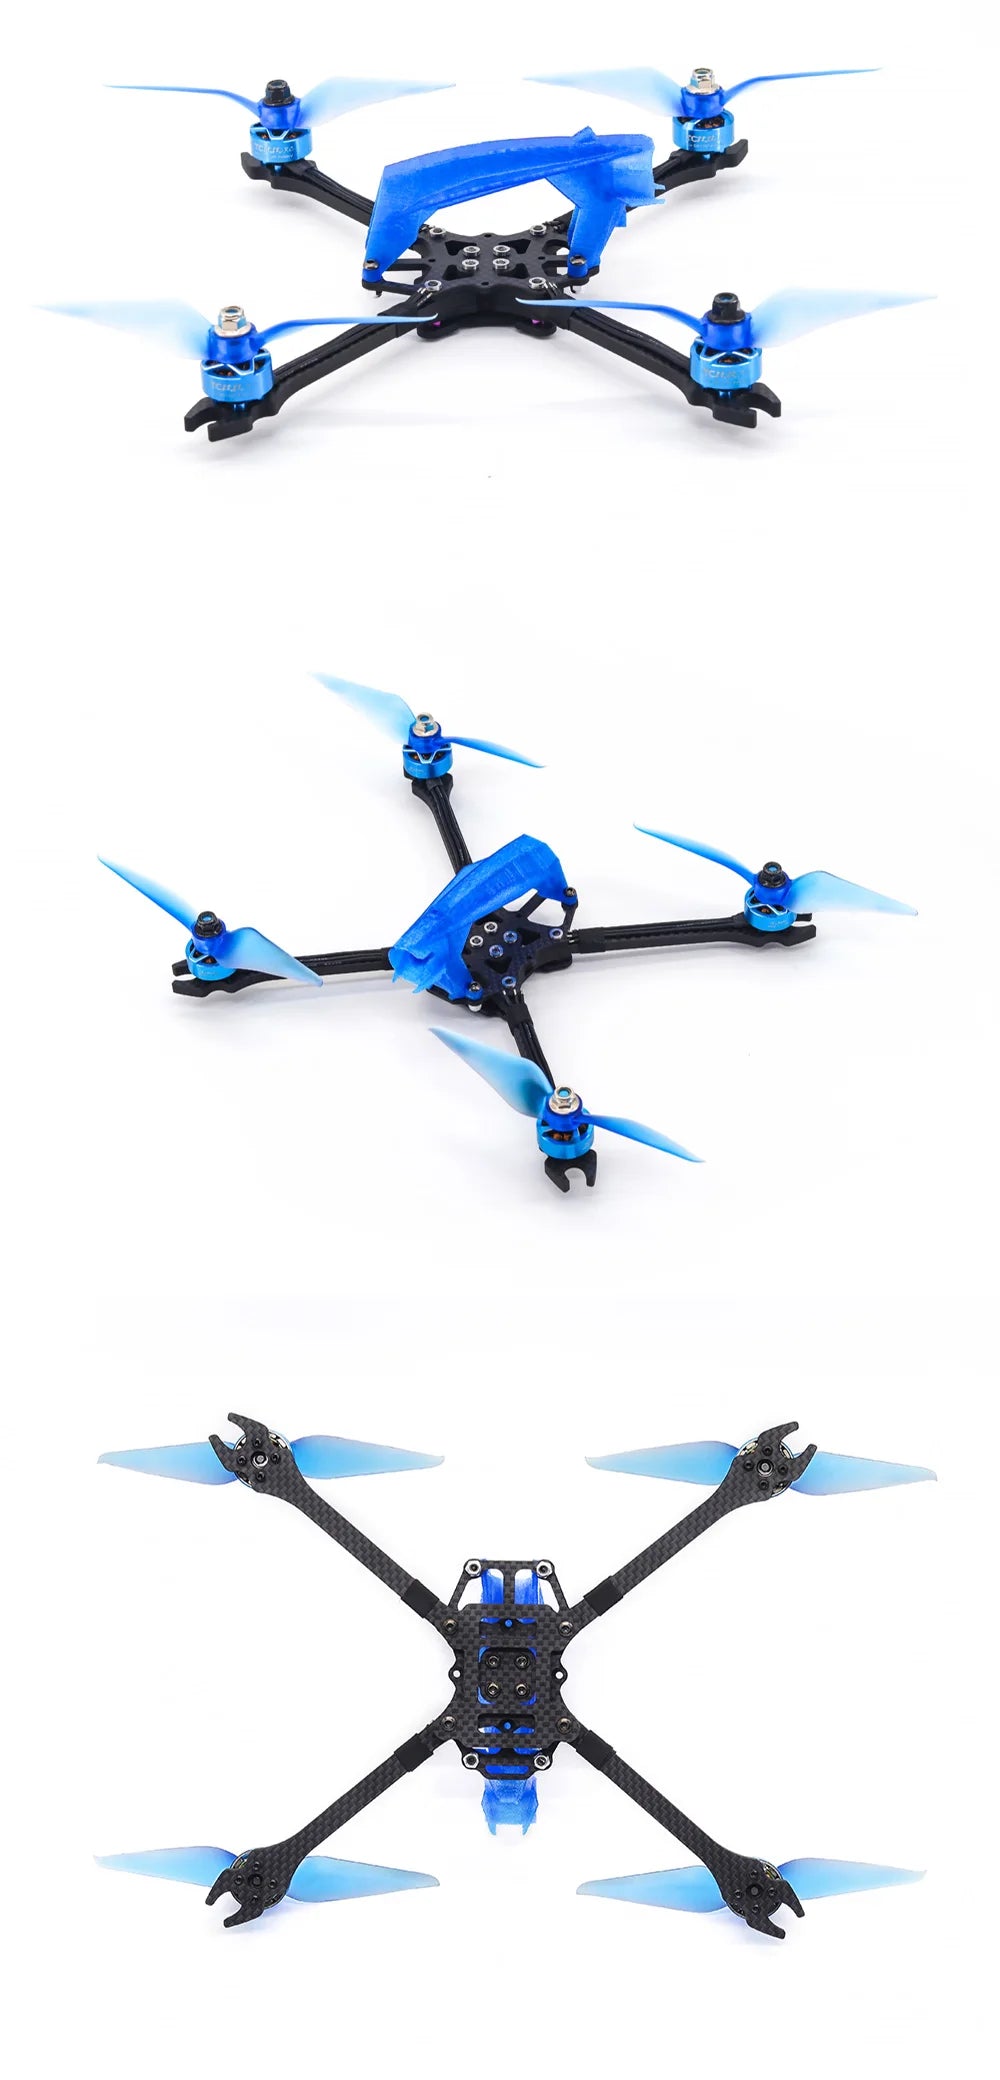 5inch FPV Frame Kit, the frame structure is simple and easy to install and disassemble, which is convenient for novices